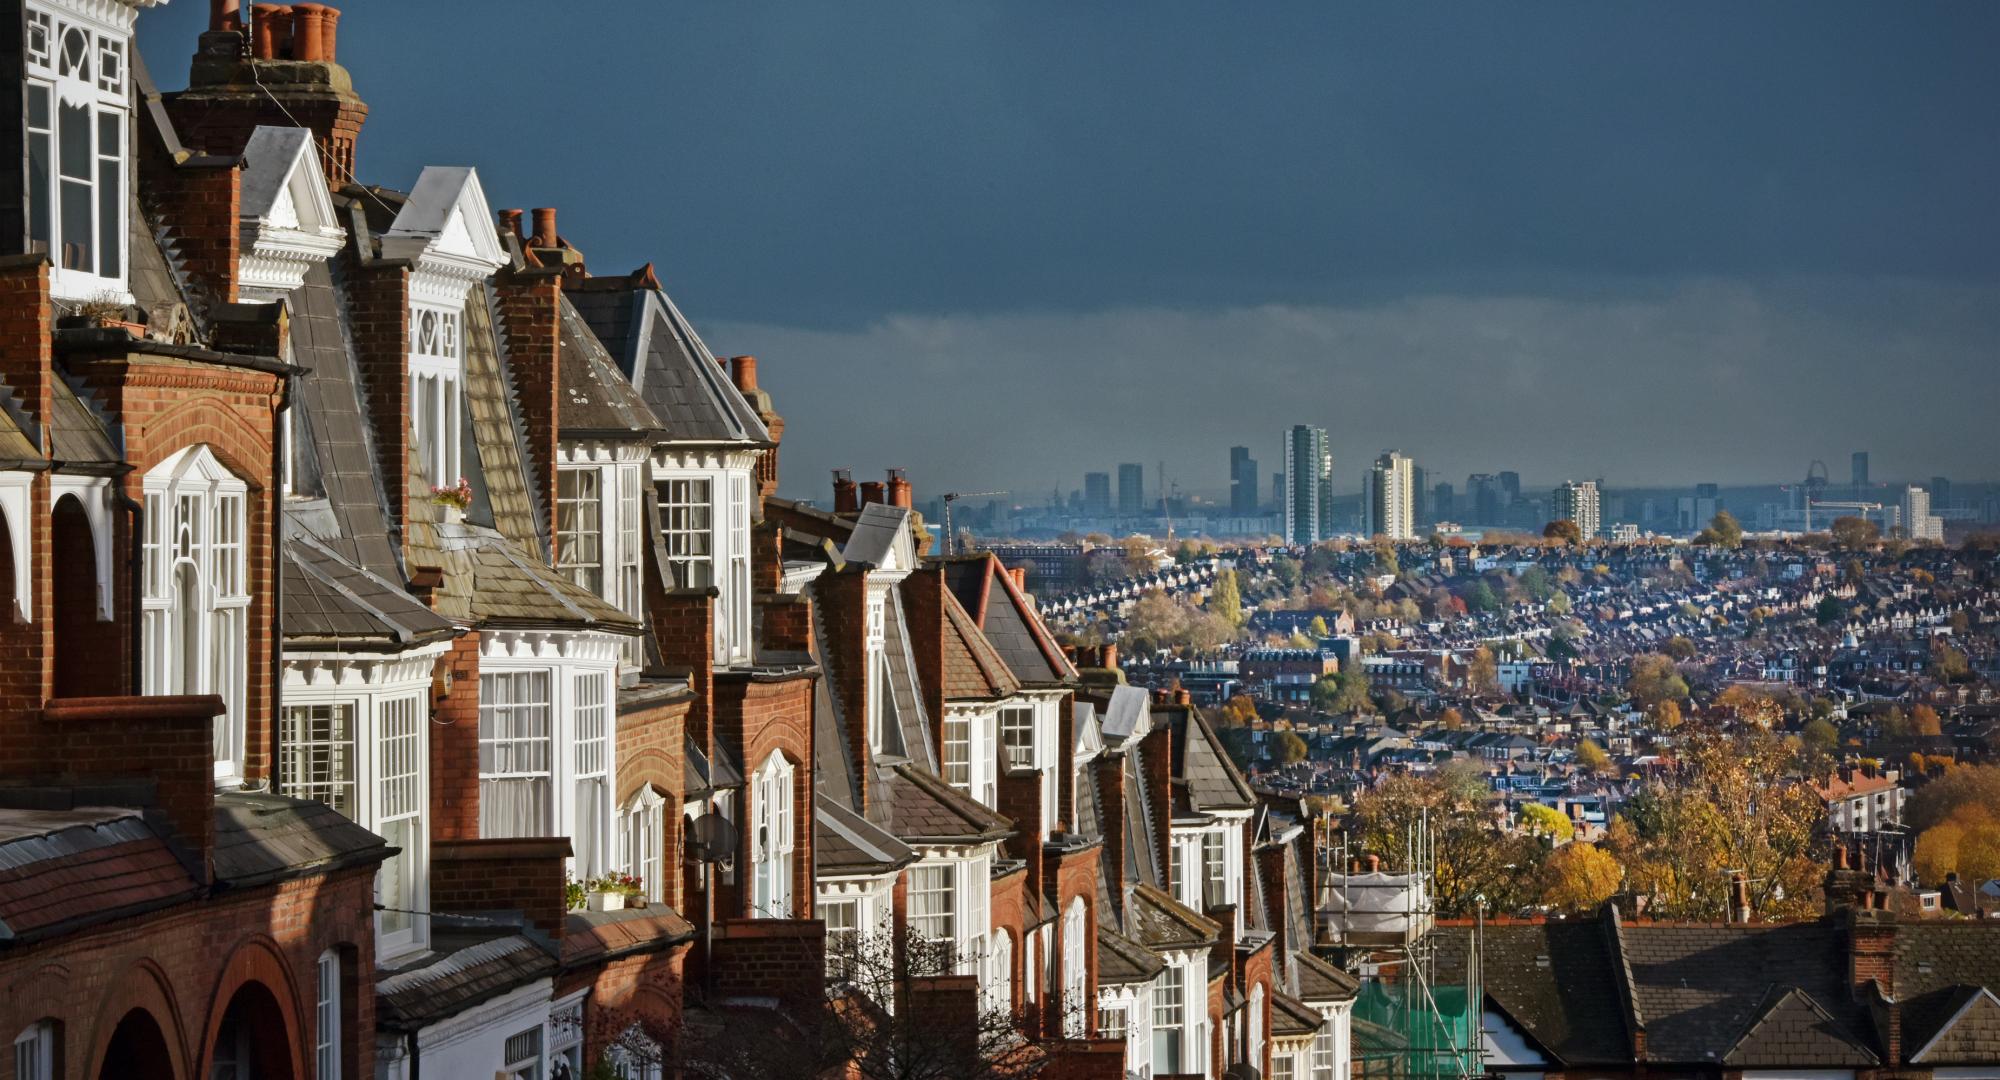 London houses with distant suburban terraces and apartment block